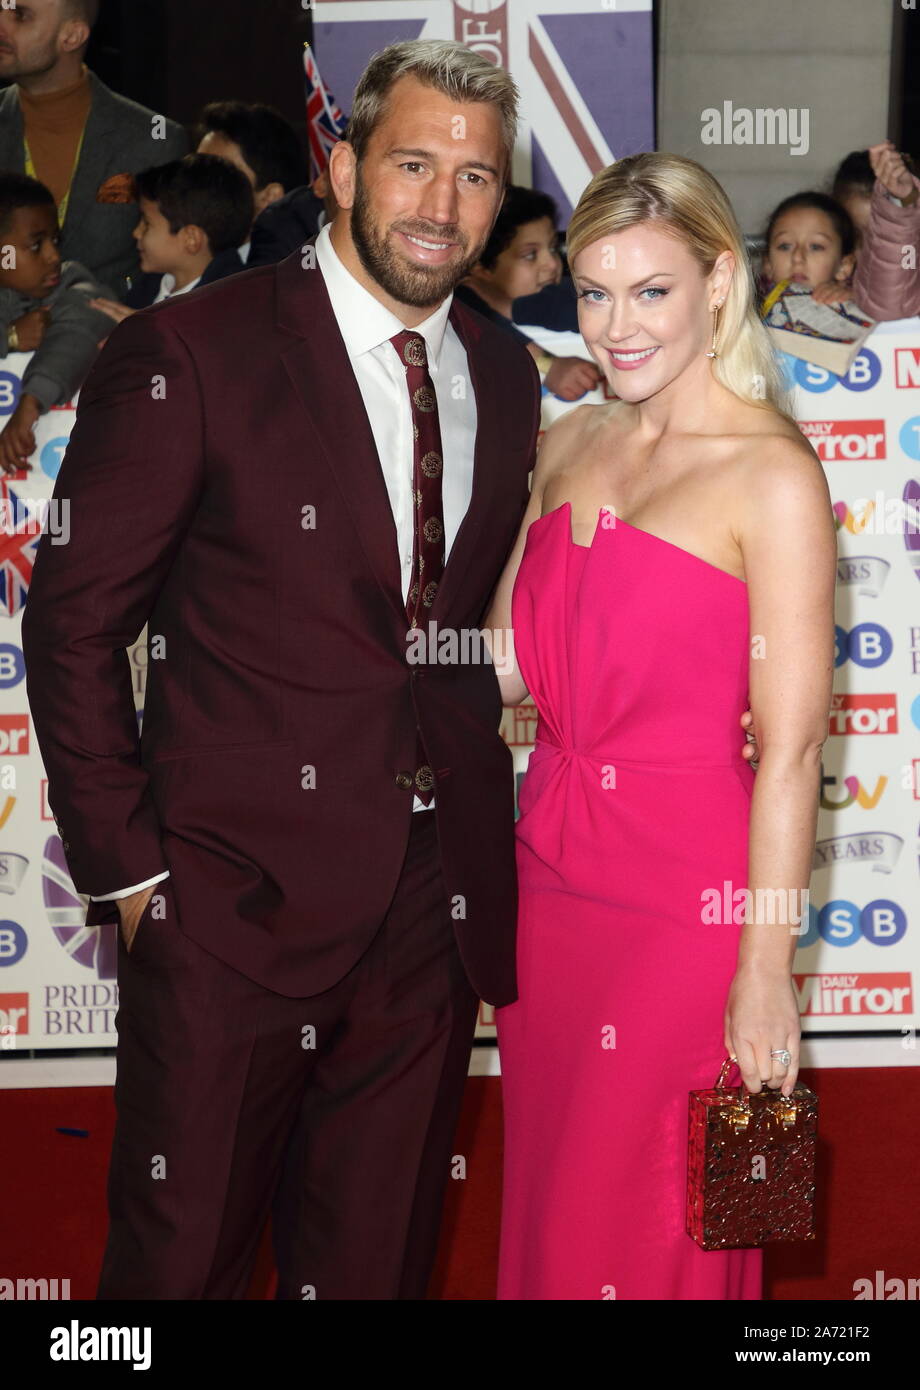 Chris Robshaw and Camilla Kerslake on the red carpet at The Daily ...